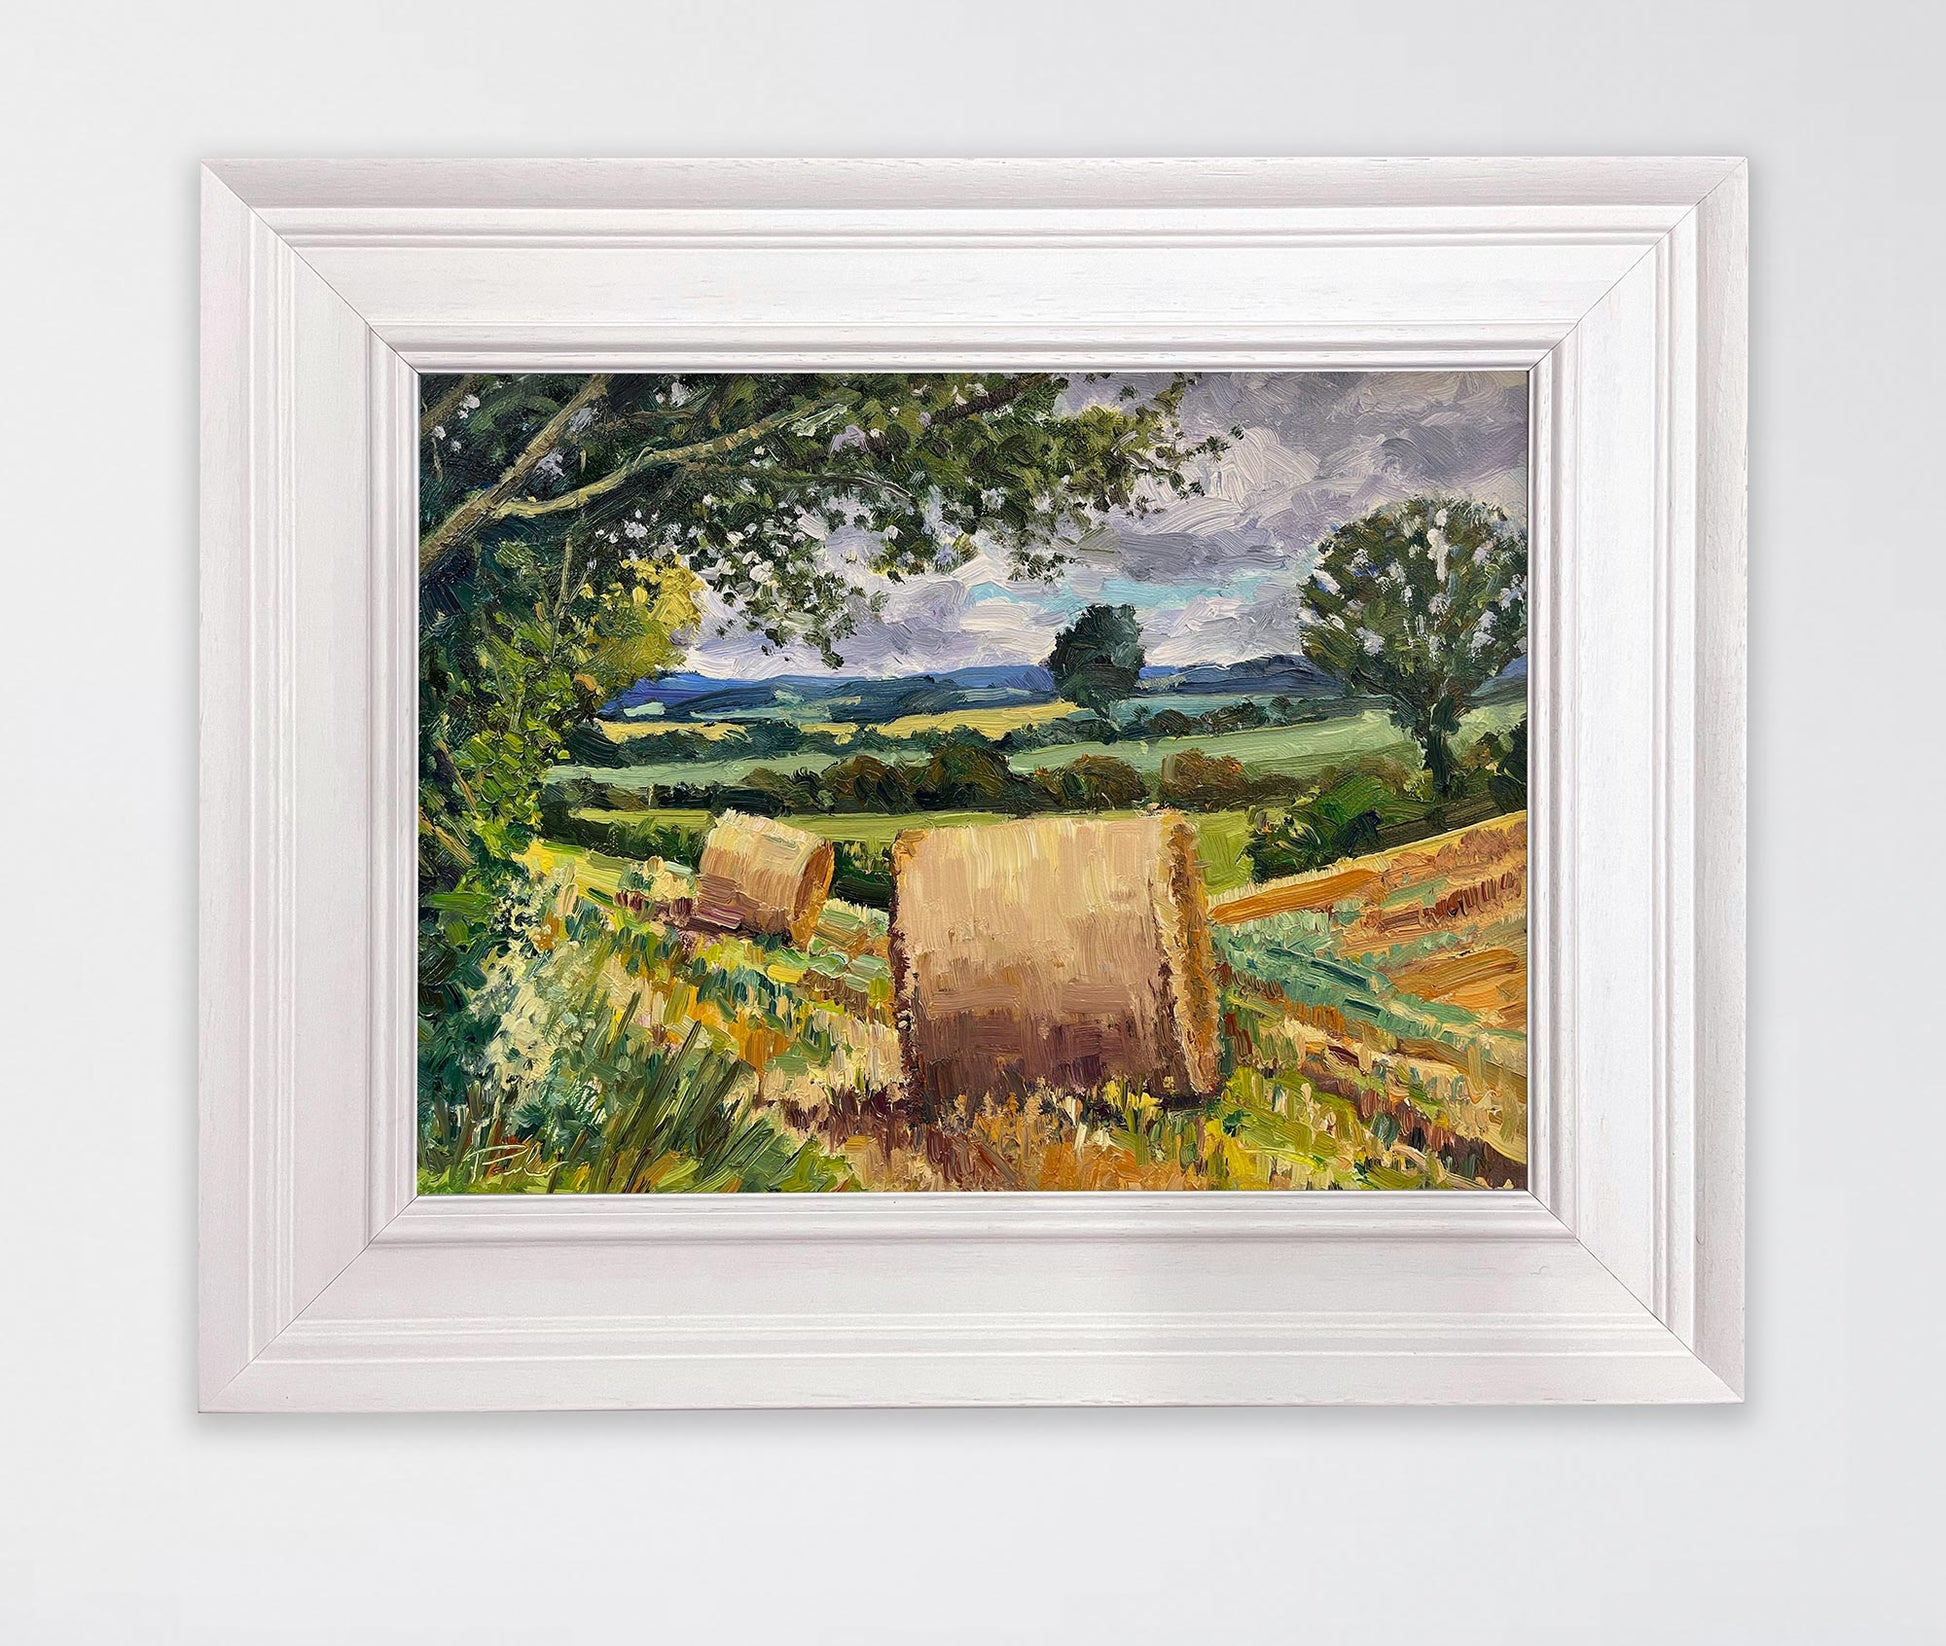 Two straw bales, Coxwold, North Yorkshire, shown framed